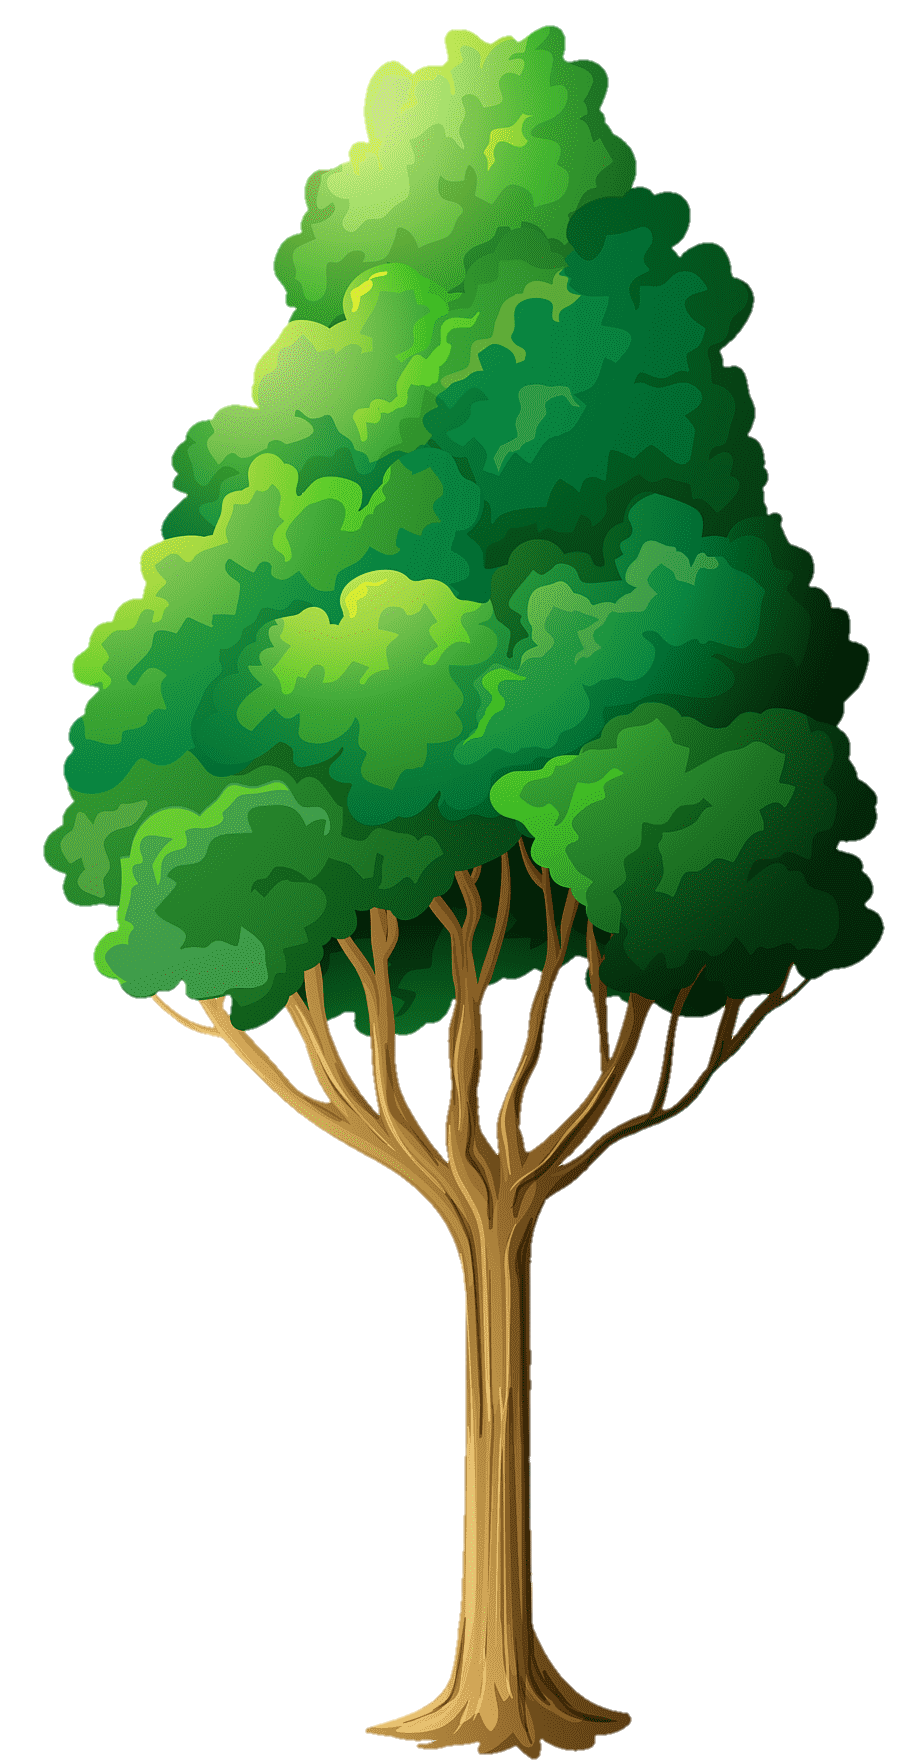 tree-png-from-pngfre-1